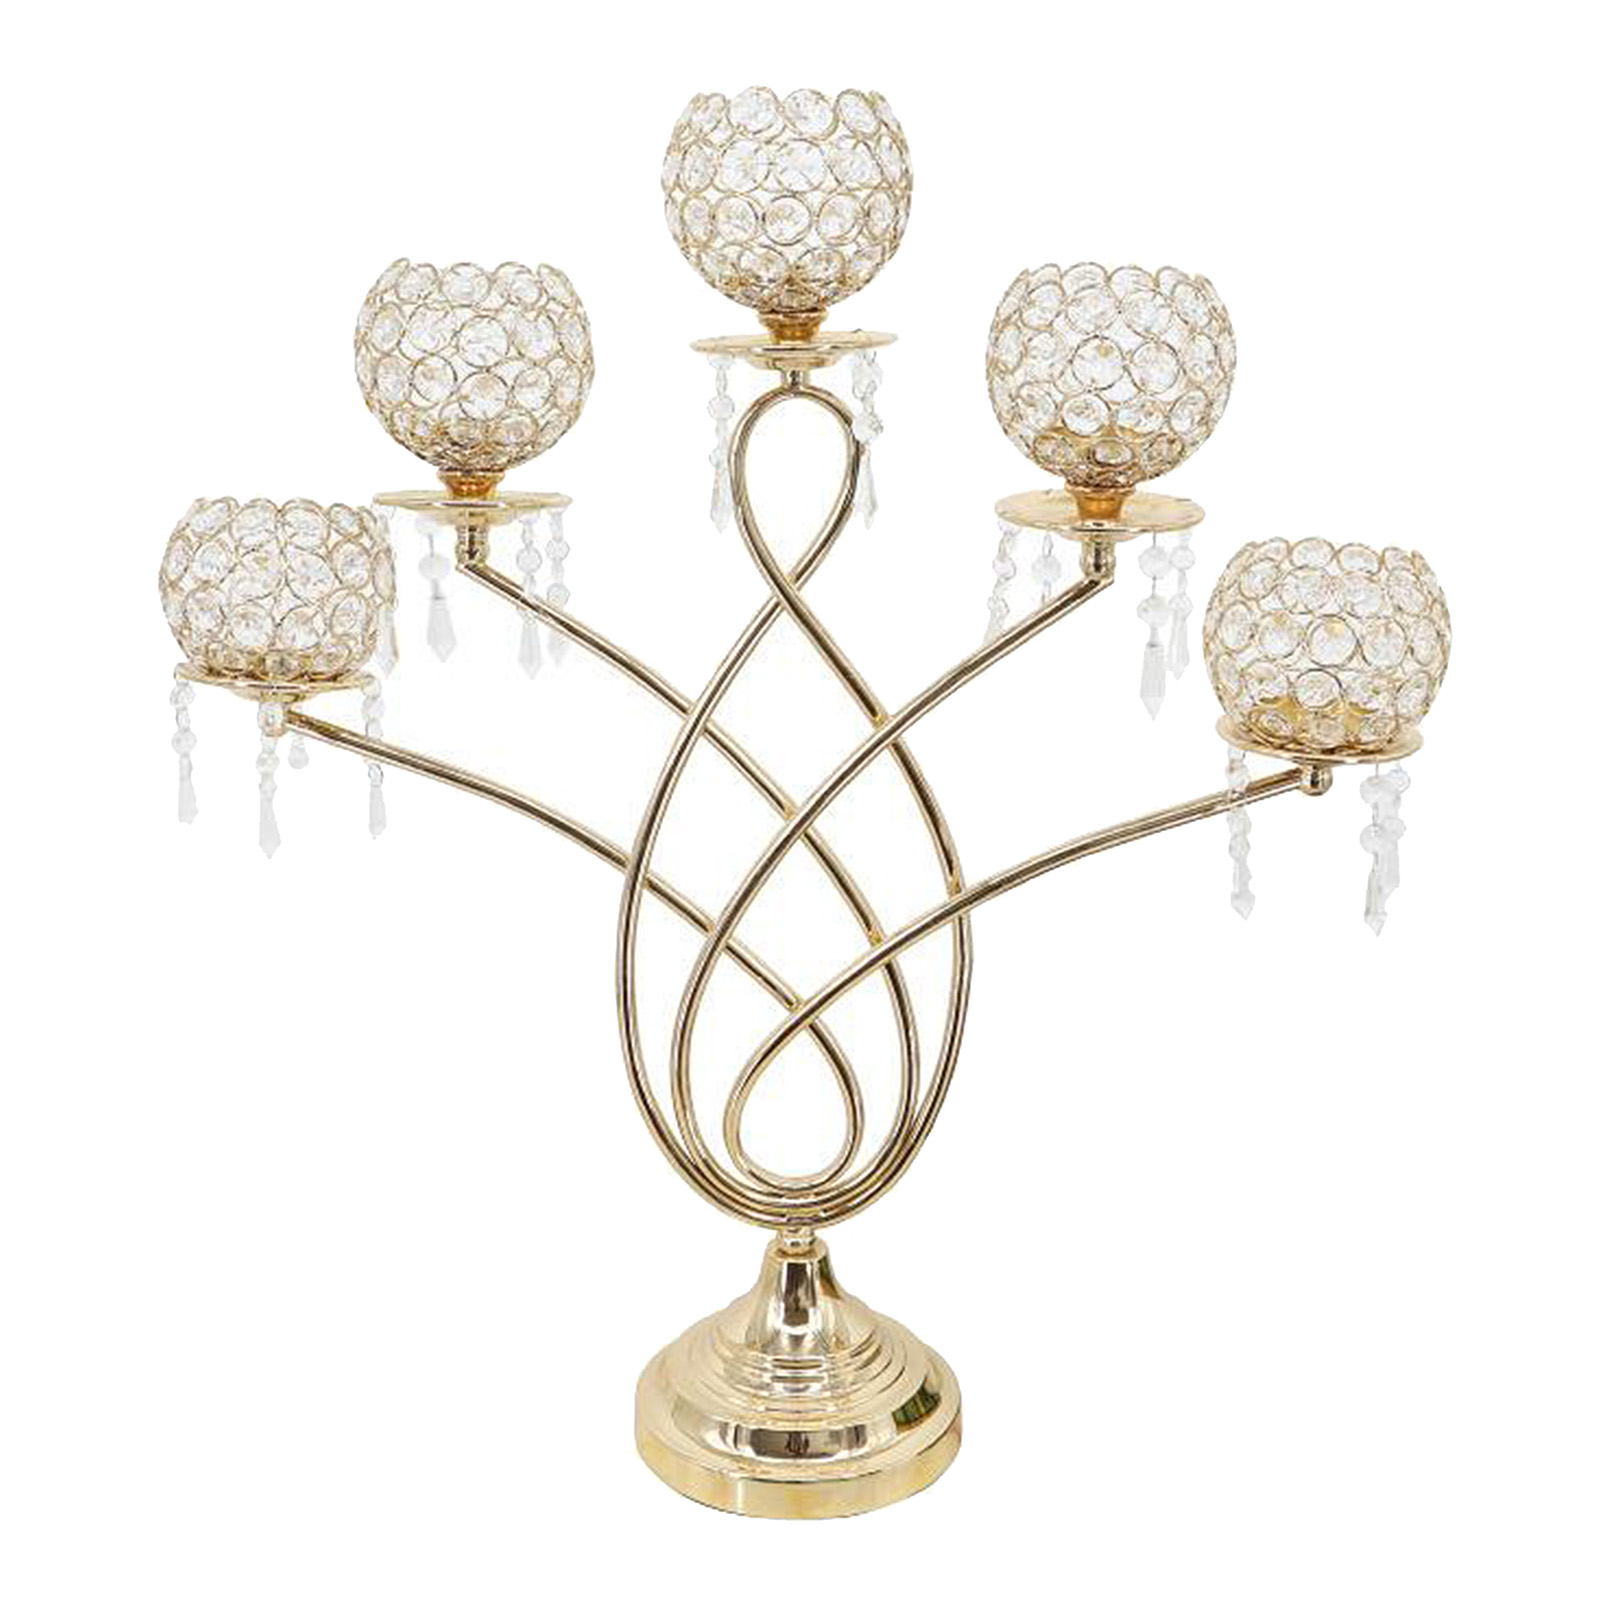 Crystal Candle Holders,5 Arms Candelabras Decorative Centerpieces for Coffee Table Living Room Table Decorative Centerpieces